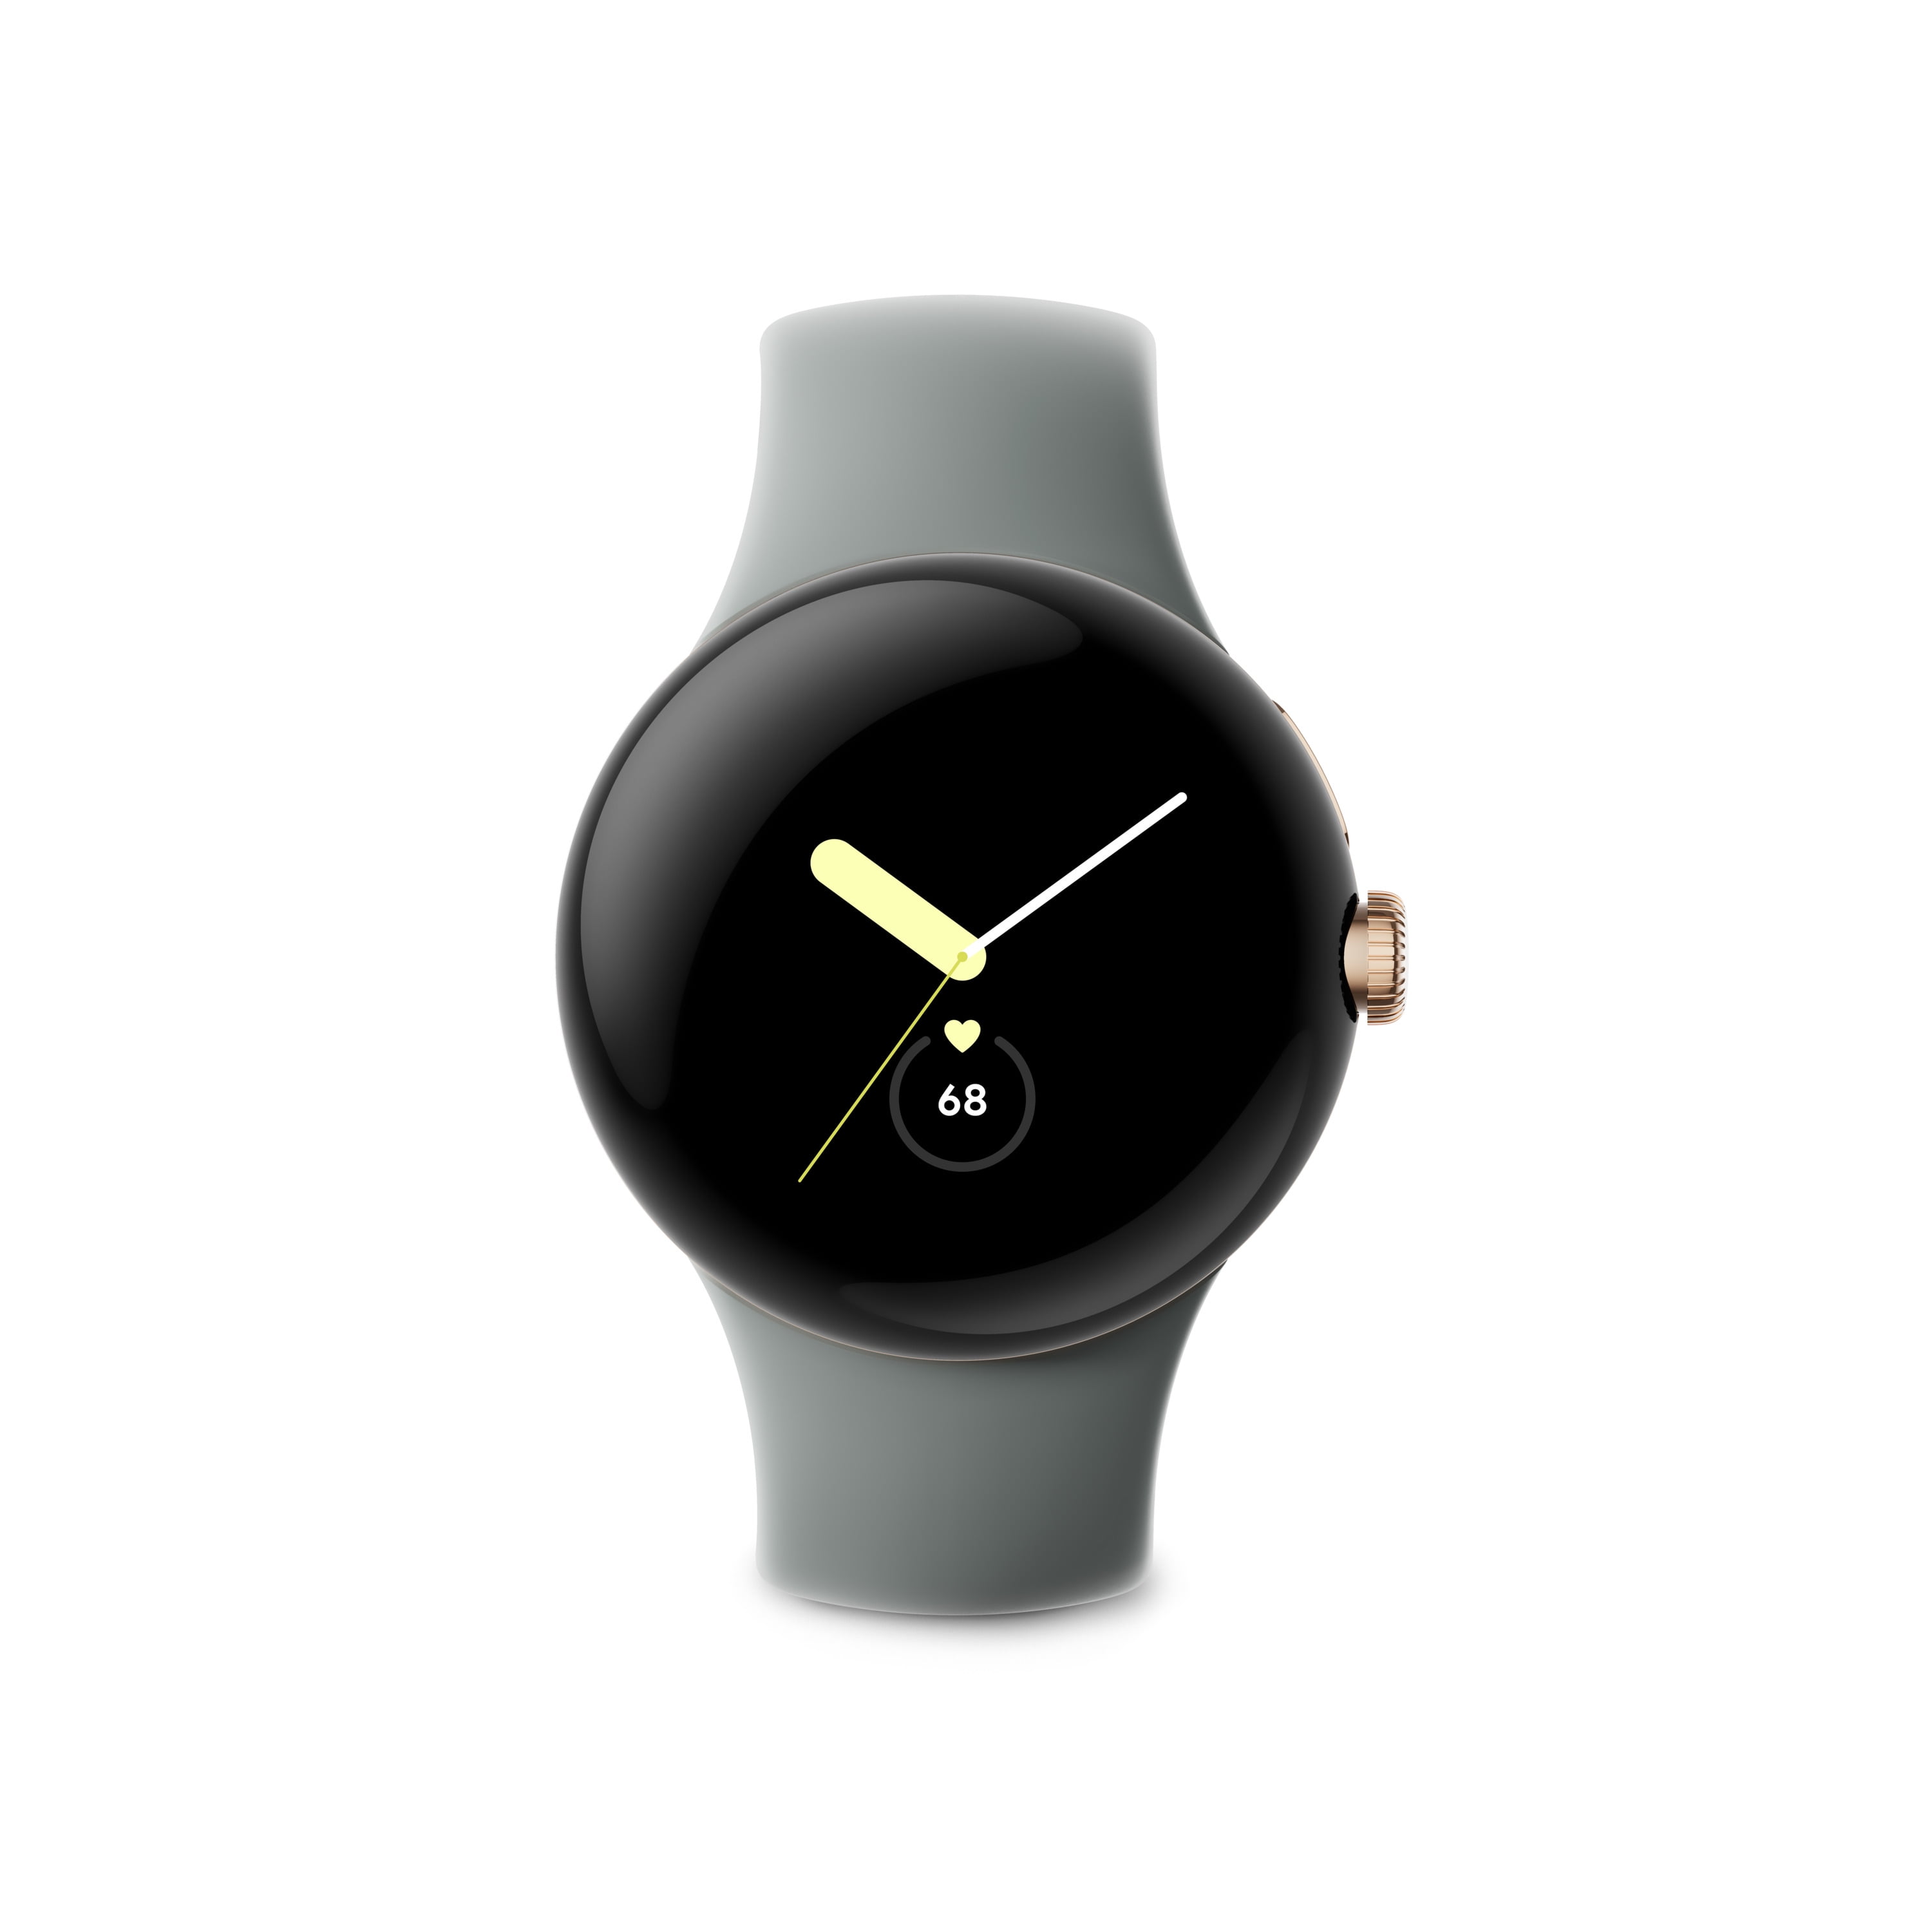 Google Pixel Watch - Android Smartwatch with Activity Tracking - WI-FI